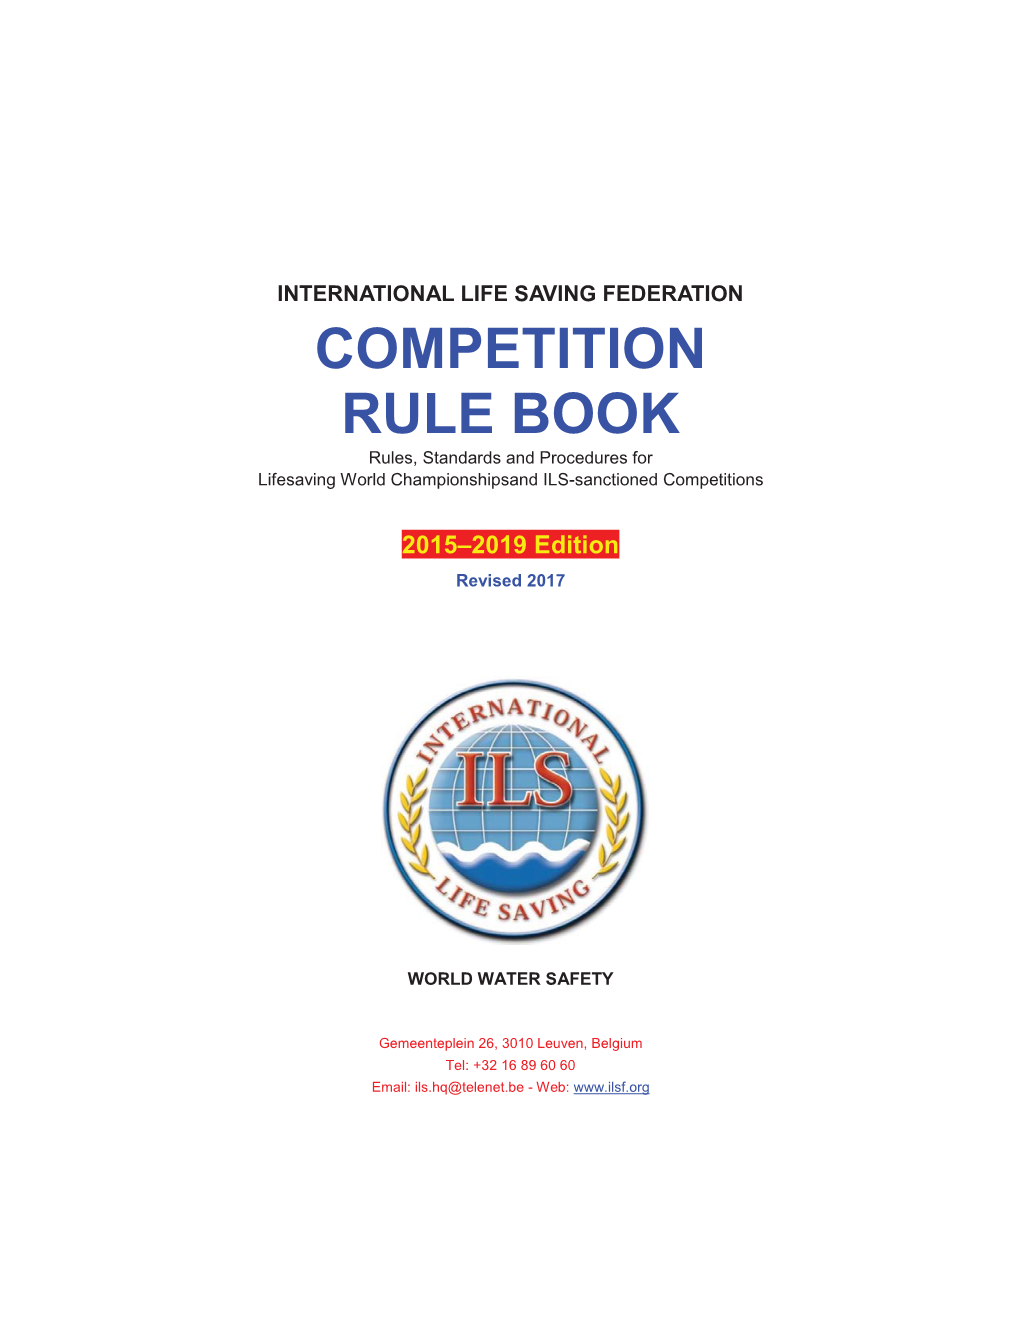 ILS Competition Manual 2013 Edition